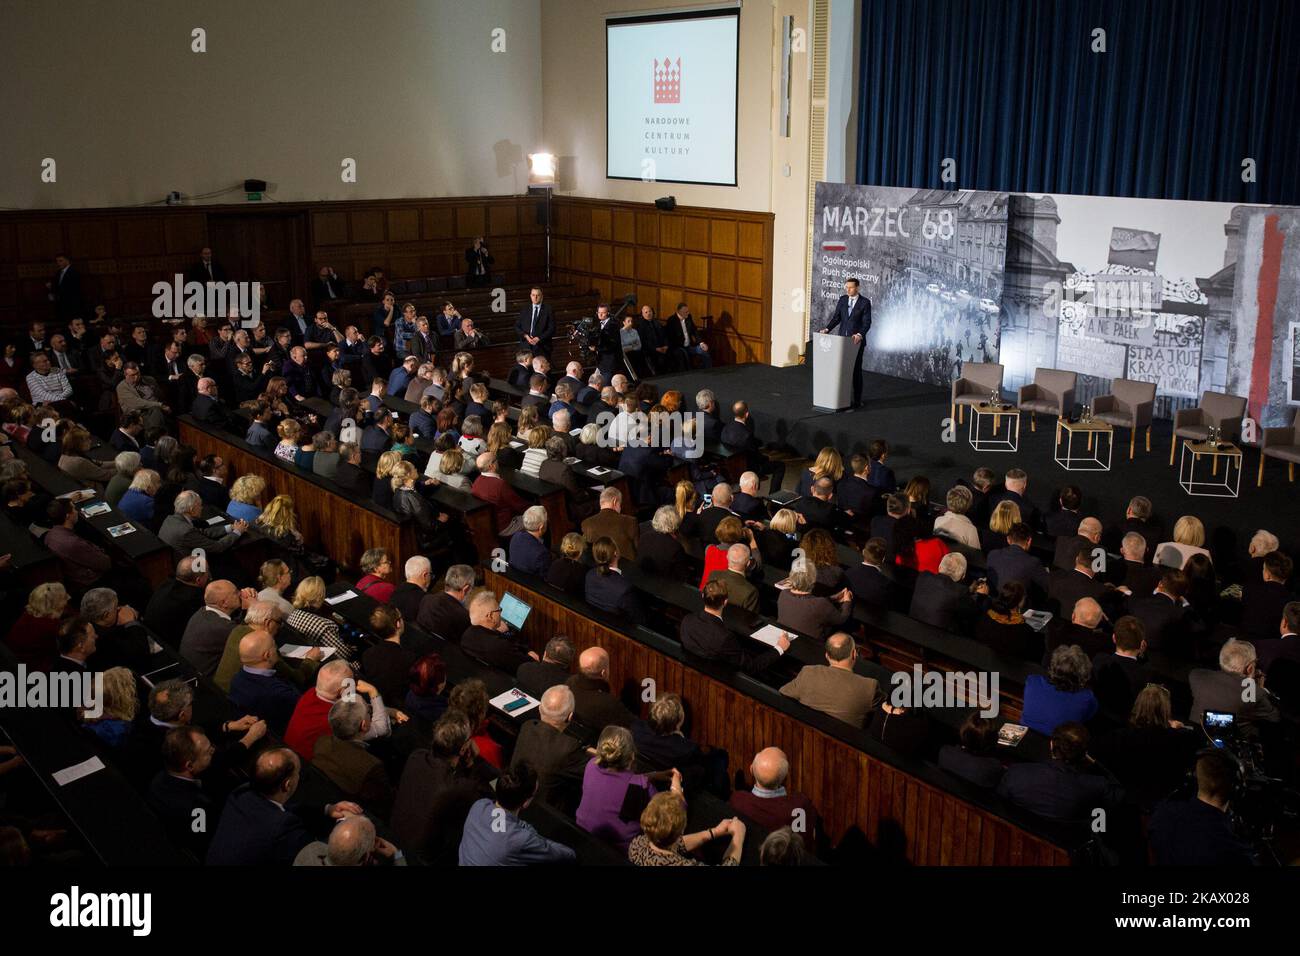 Debate about 'March 1968' (1968 Polish political crisis) at University of Warsaw, in Warsaw, Poland on 7 March 2018 (Photo by Mateusz Wlodarczyk/NurPhoto) Stock Photo